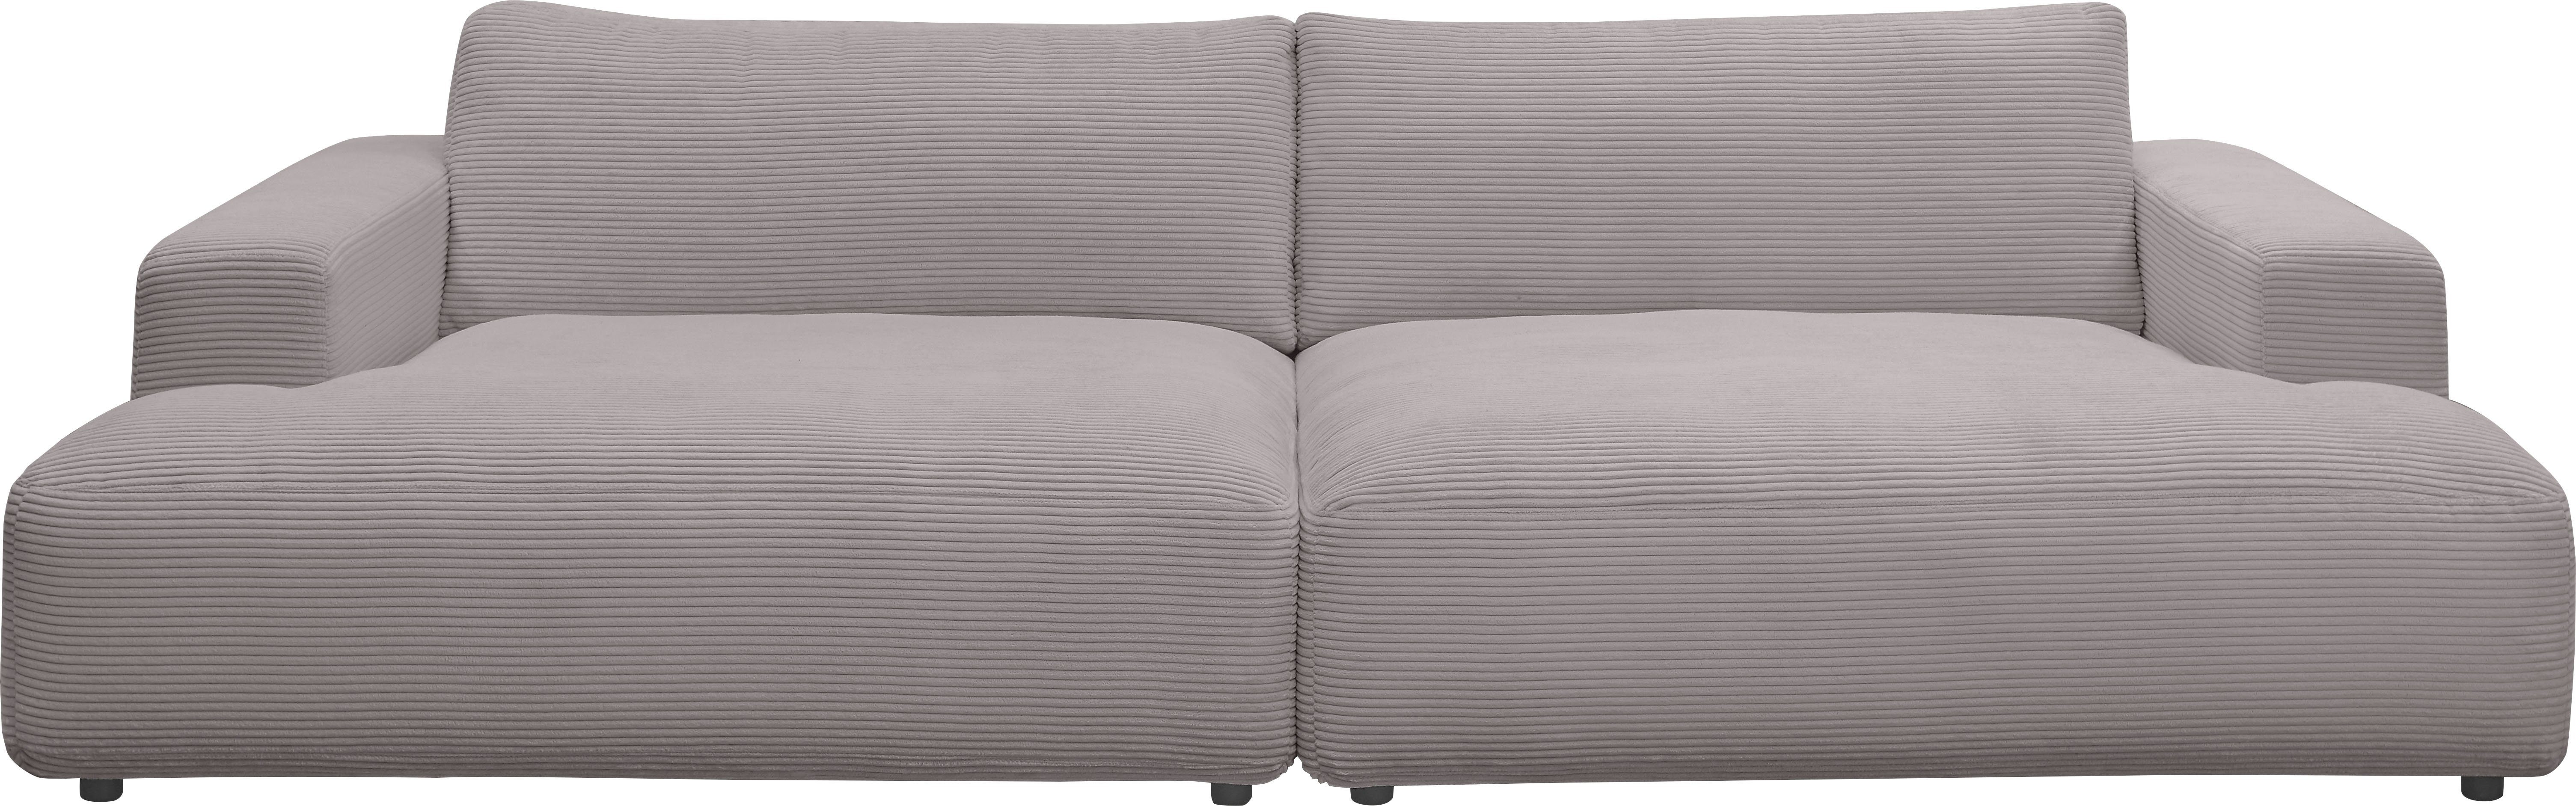 GALLERY M branded by Musterring Loungesofa Lucia, Cord-Bezug, Breite 292 cm grey